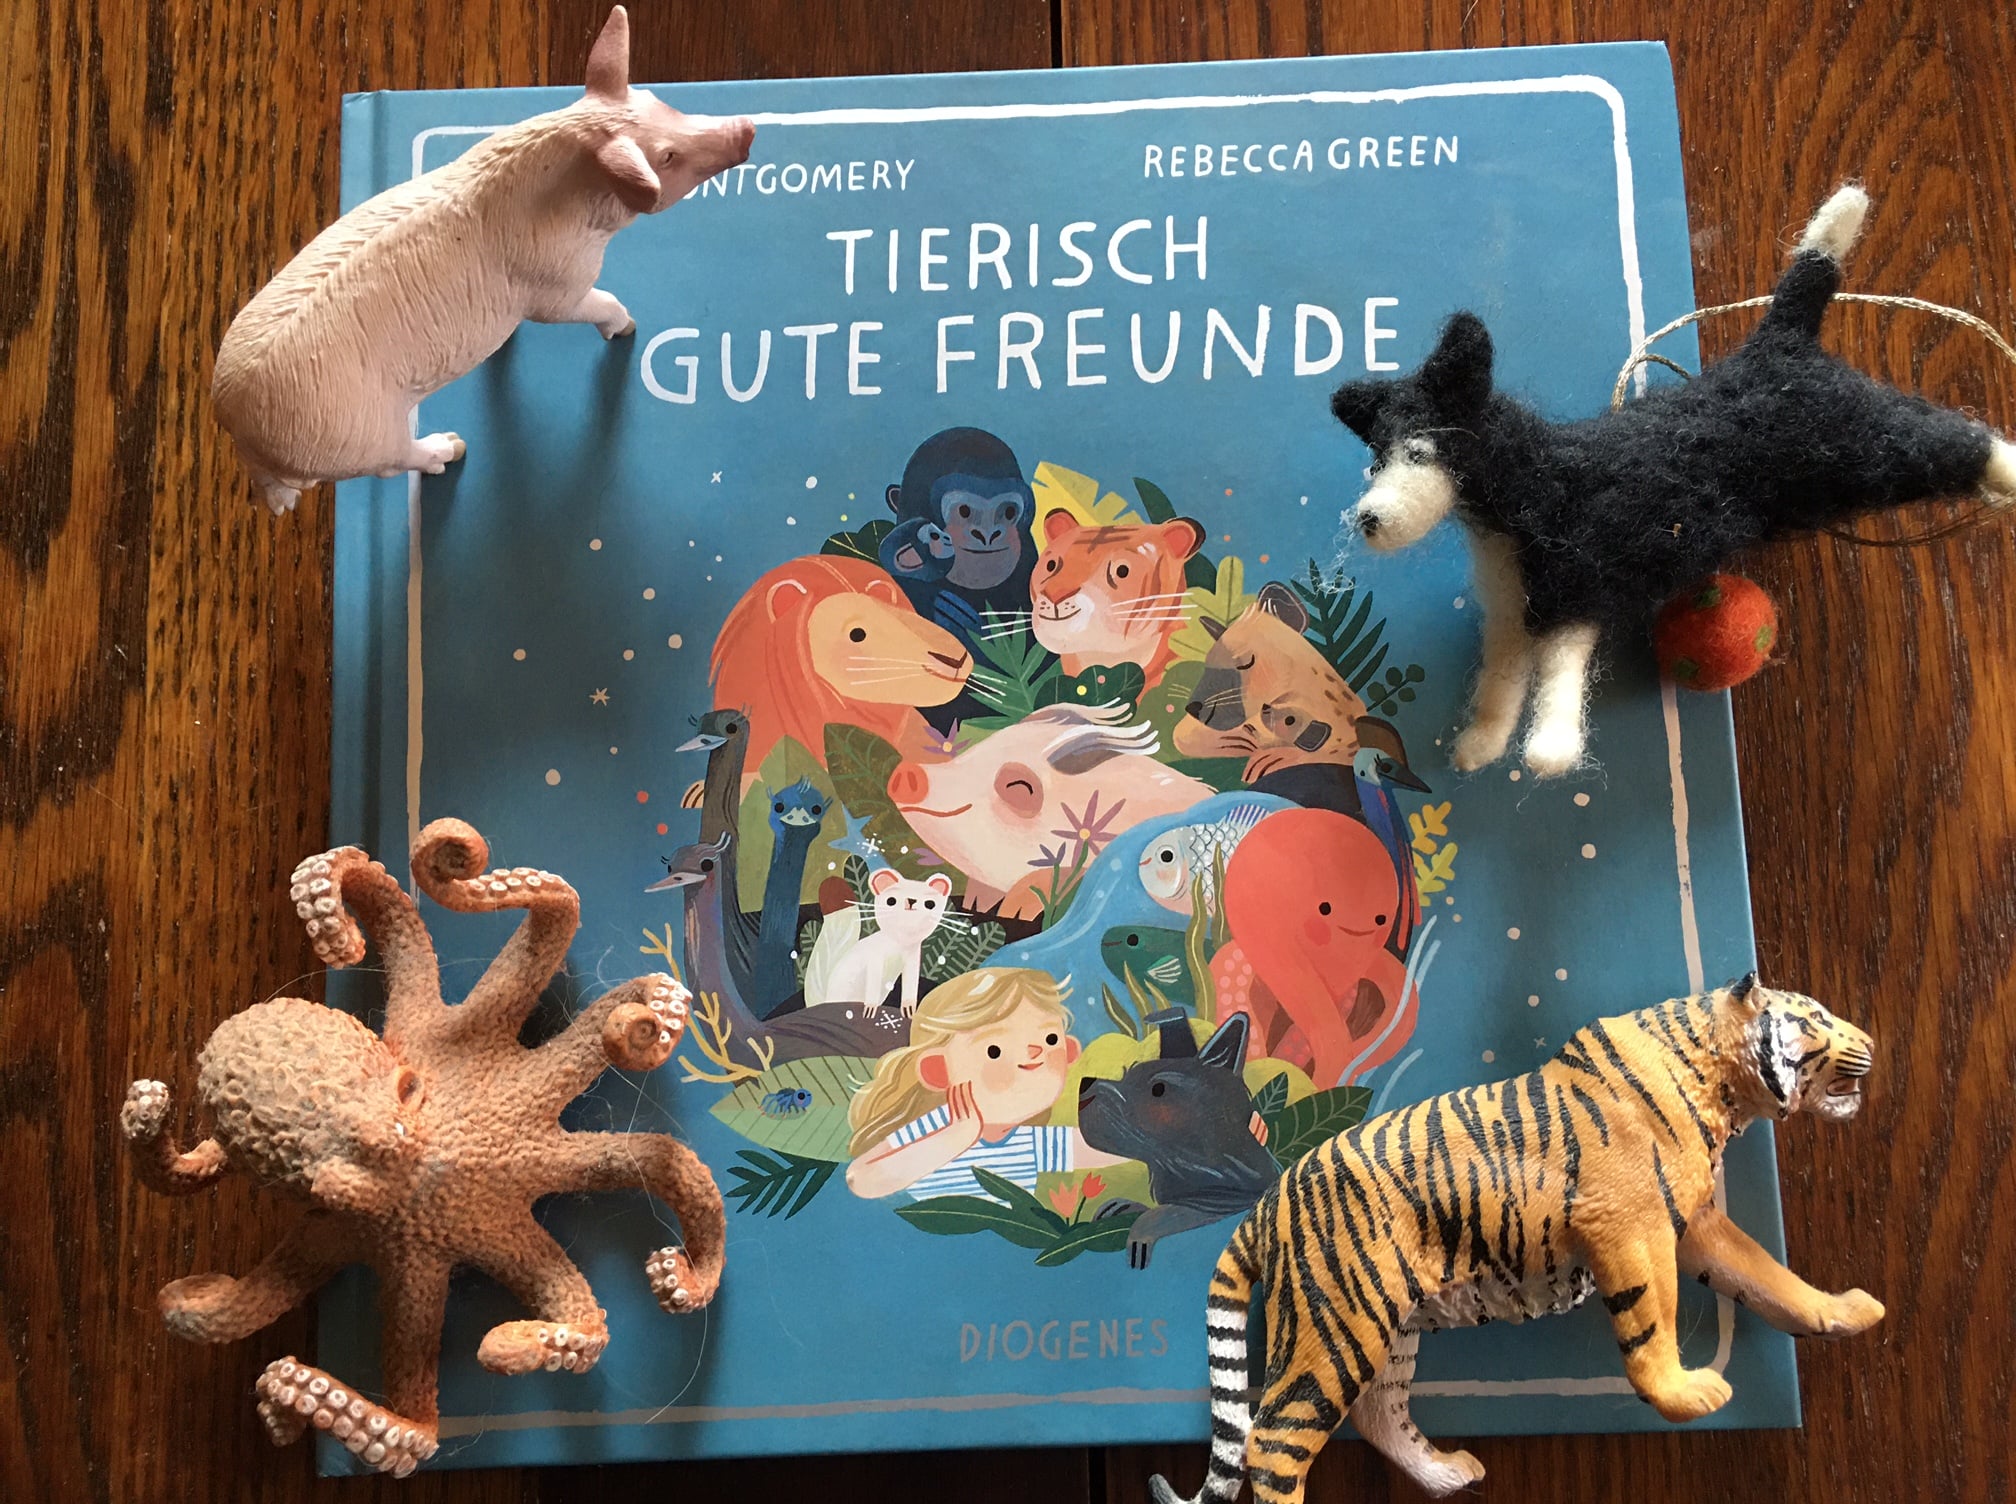 Becoming a Good Creature is now available in German